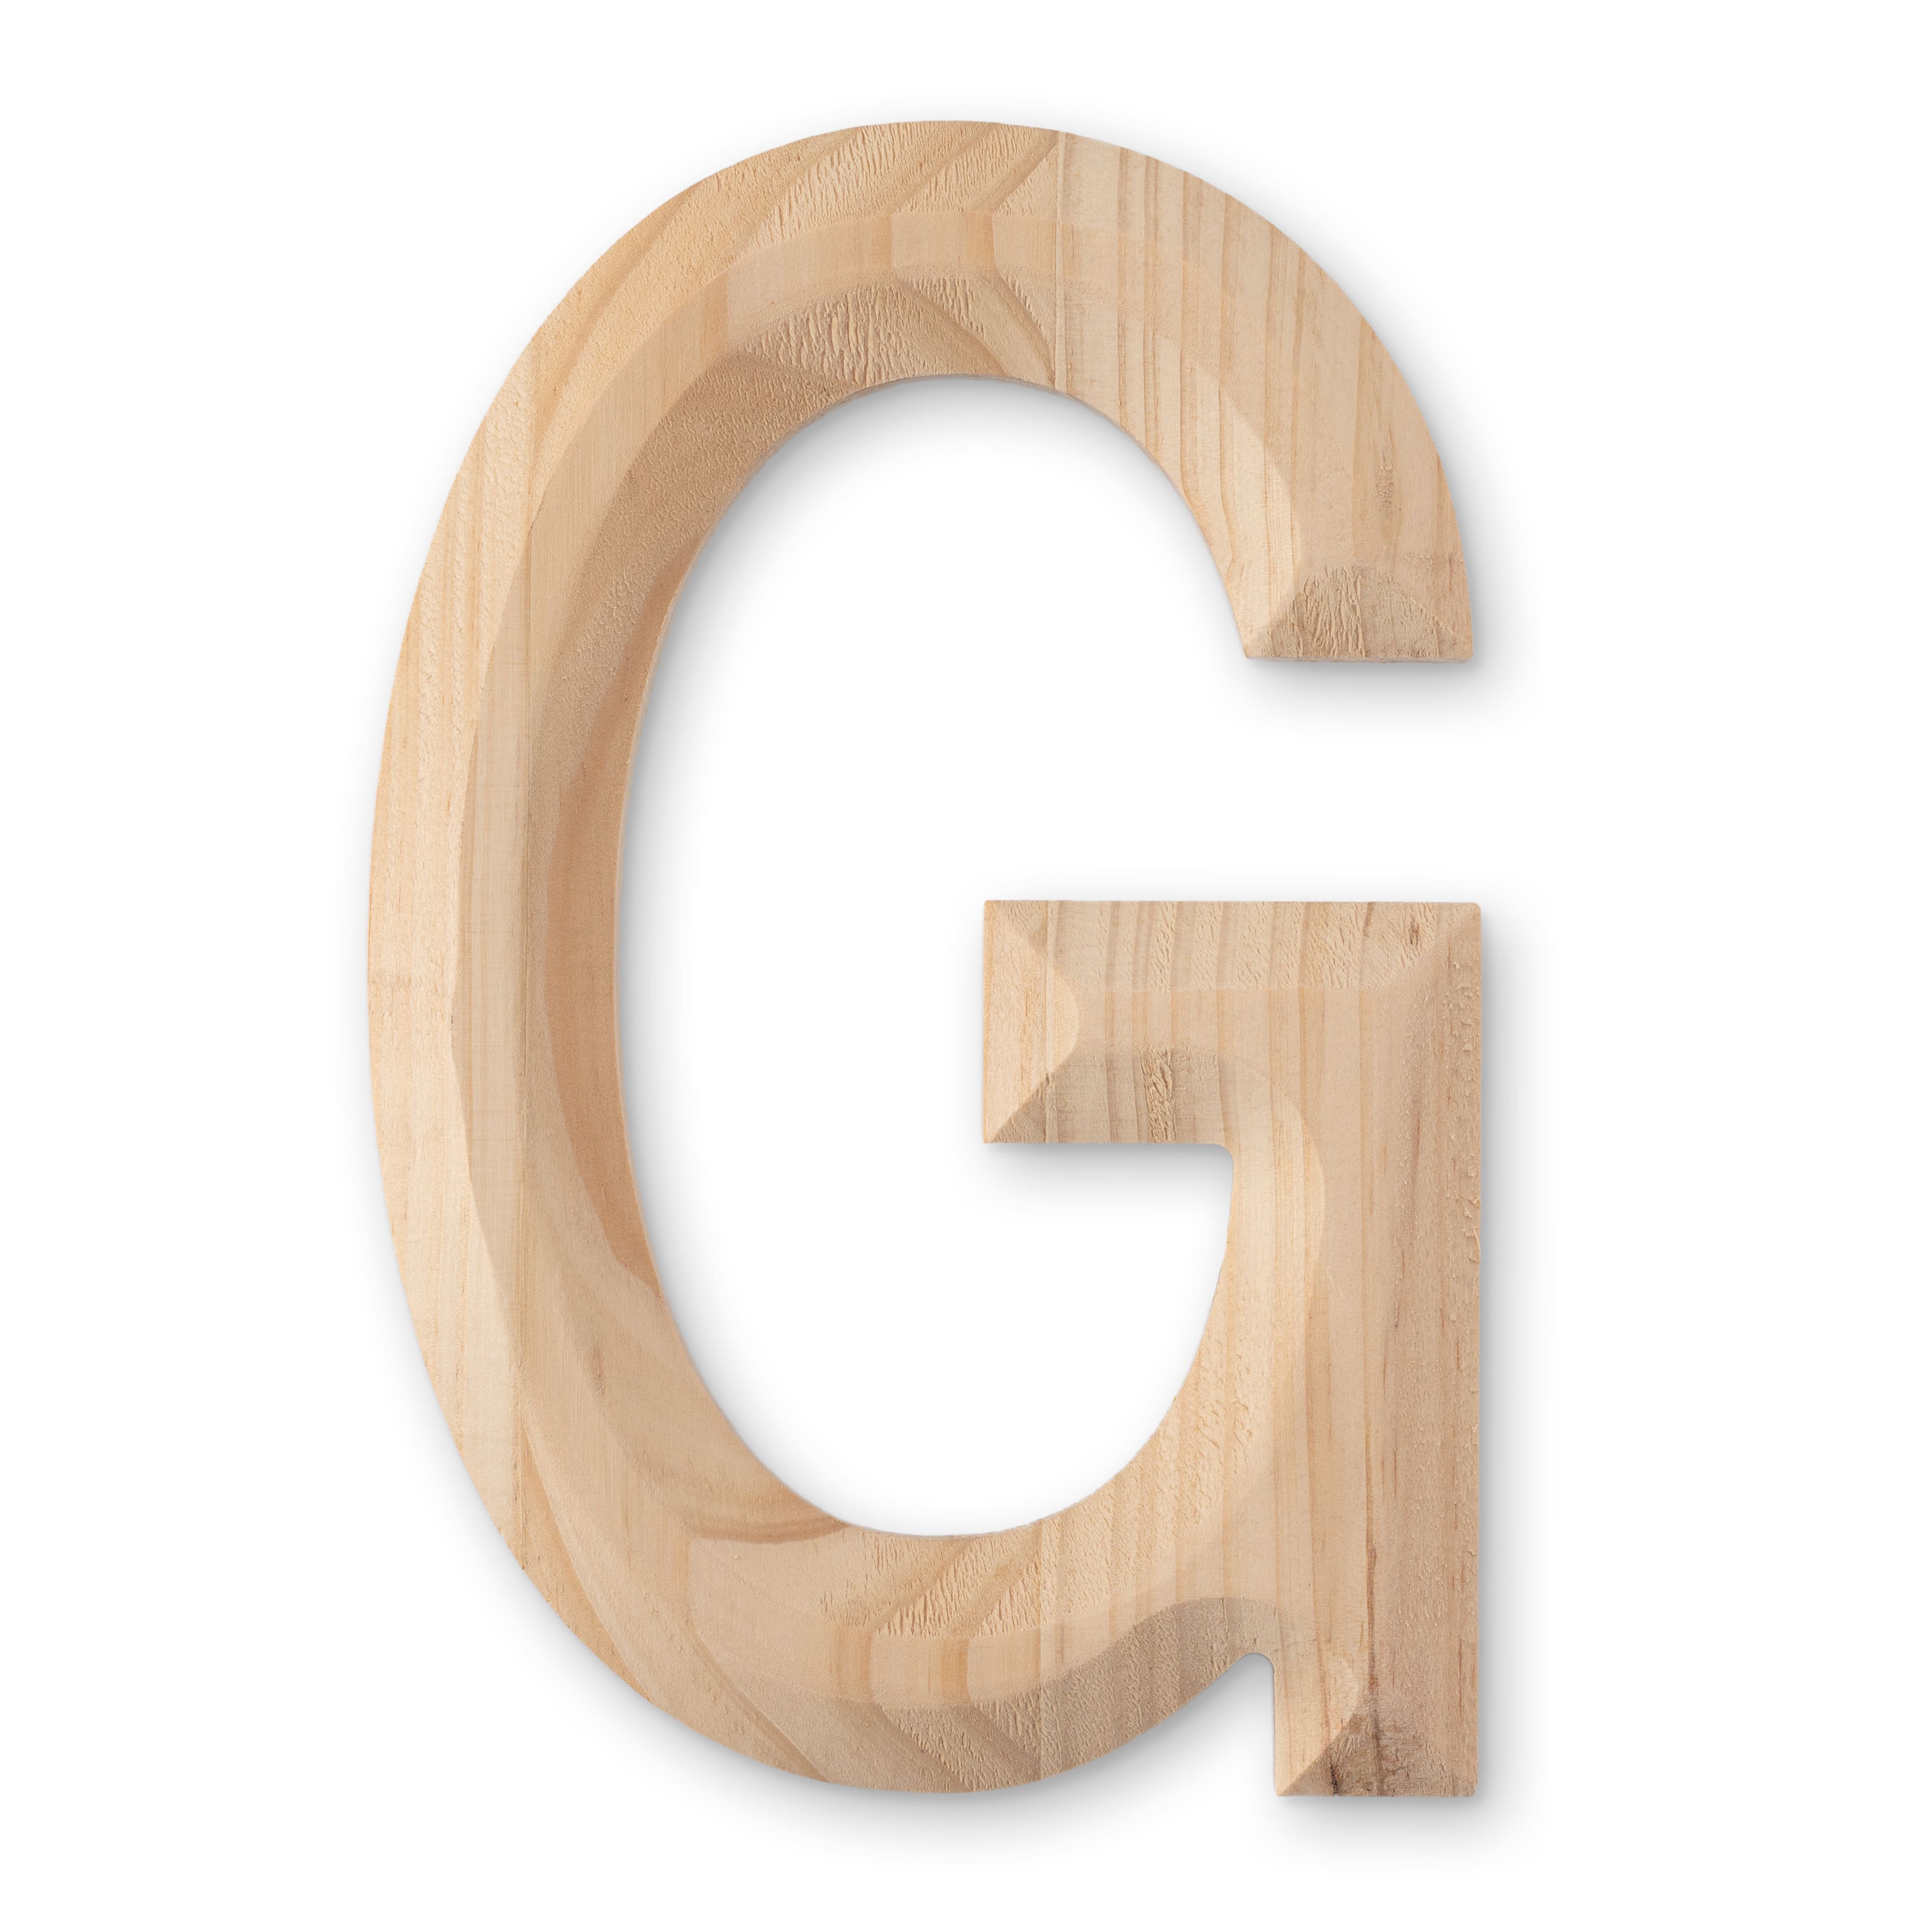 Wooden Letters - 144-Count Wood Alphabet Letters and Numbers for